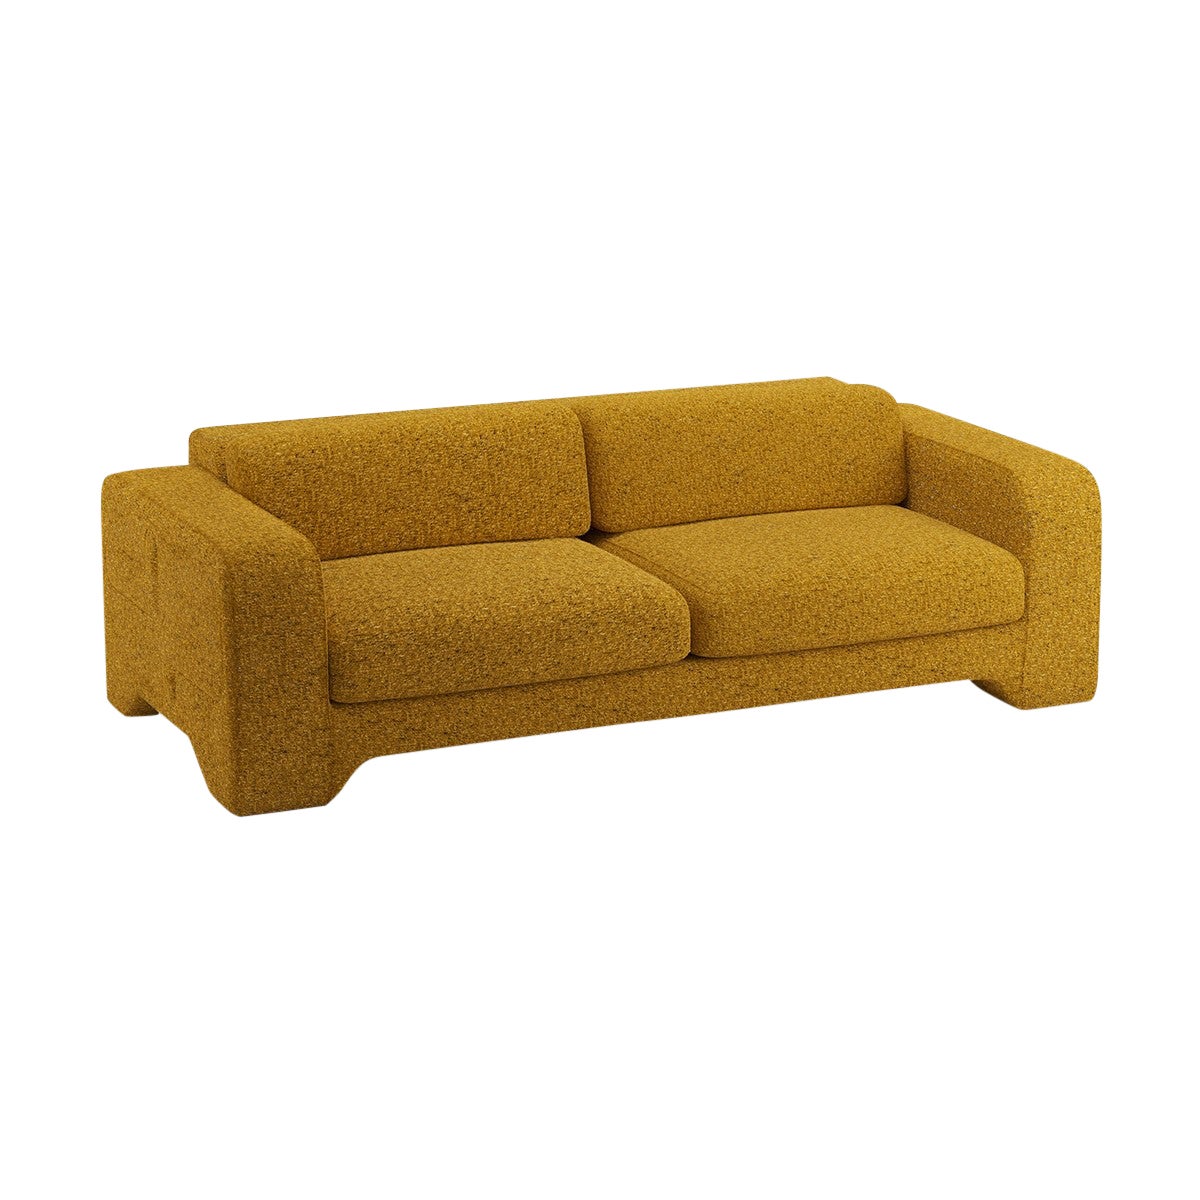 Popus Editions Giovanna 2.5 Seater Sofa in Amber Venice Chenille Velvet Fabric For Sale